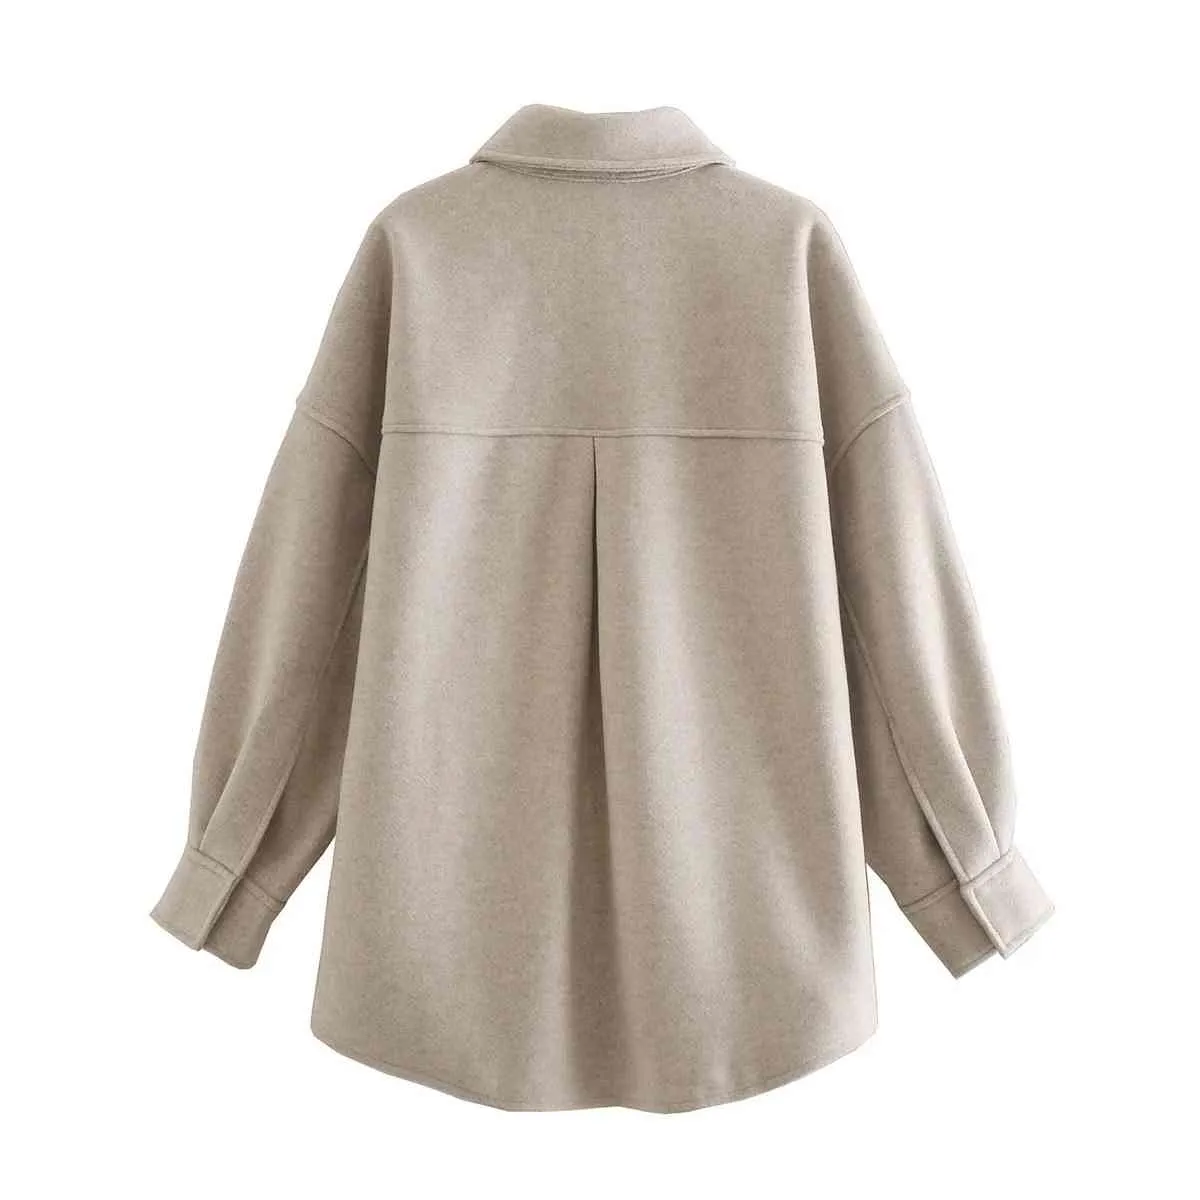 Casual Camel Loose Pocket Woolen Shirt Woman Fashion Ladies Sping Long Sleeve Thick Blouse Coat Female Outwear 210520